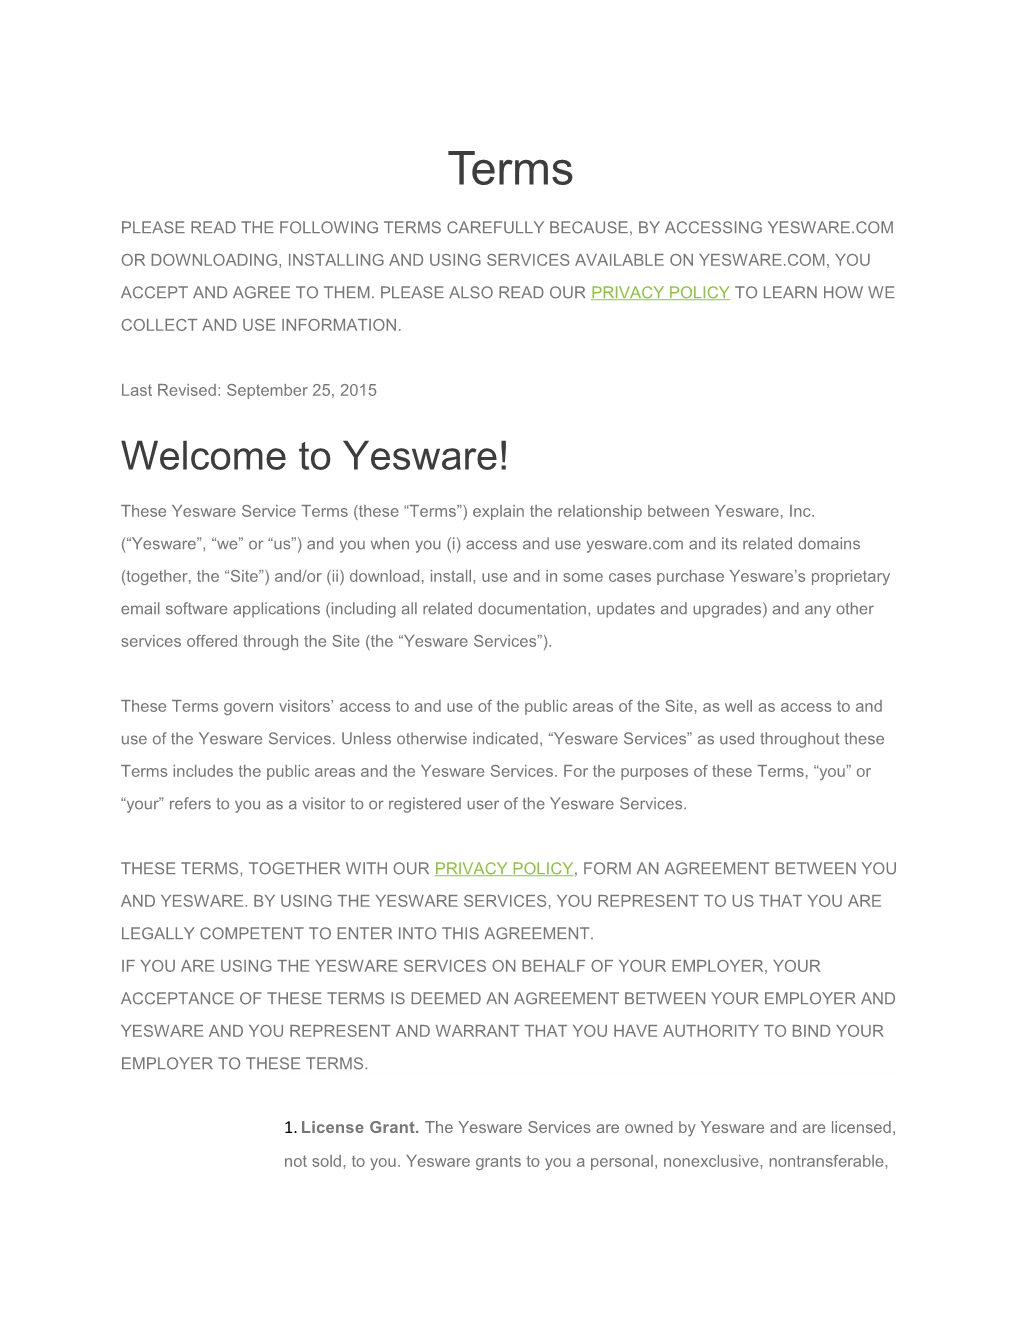 Please Read the Following Terms Carefully Because, by Accessing Yesware.Com Or Downloading